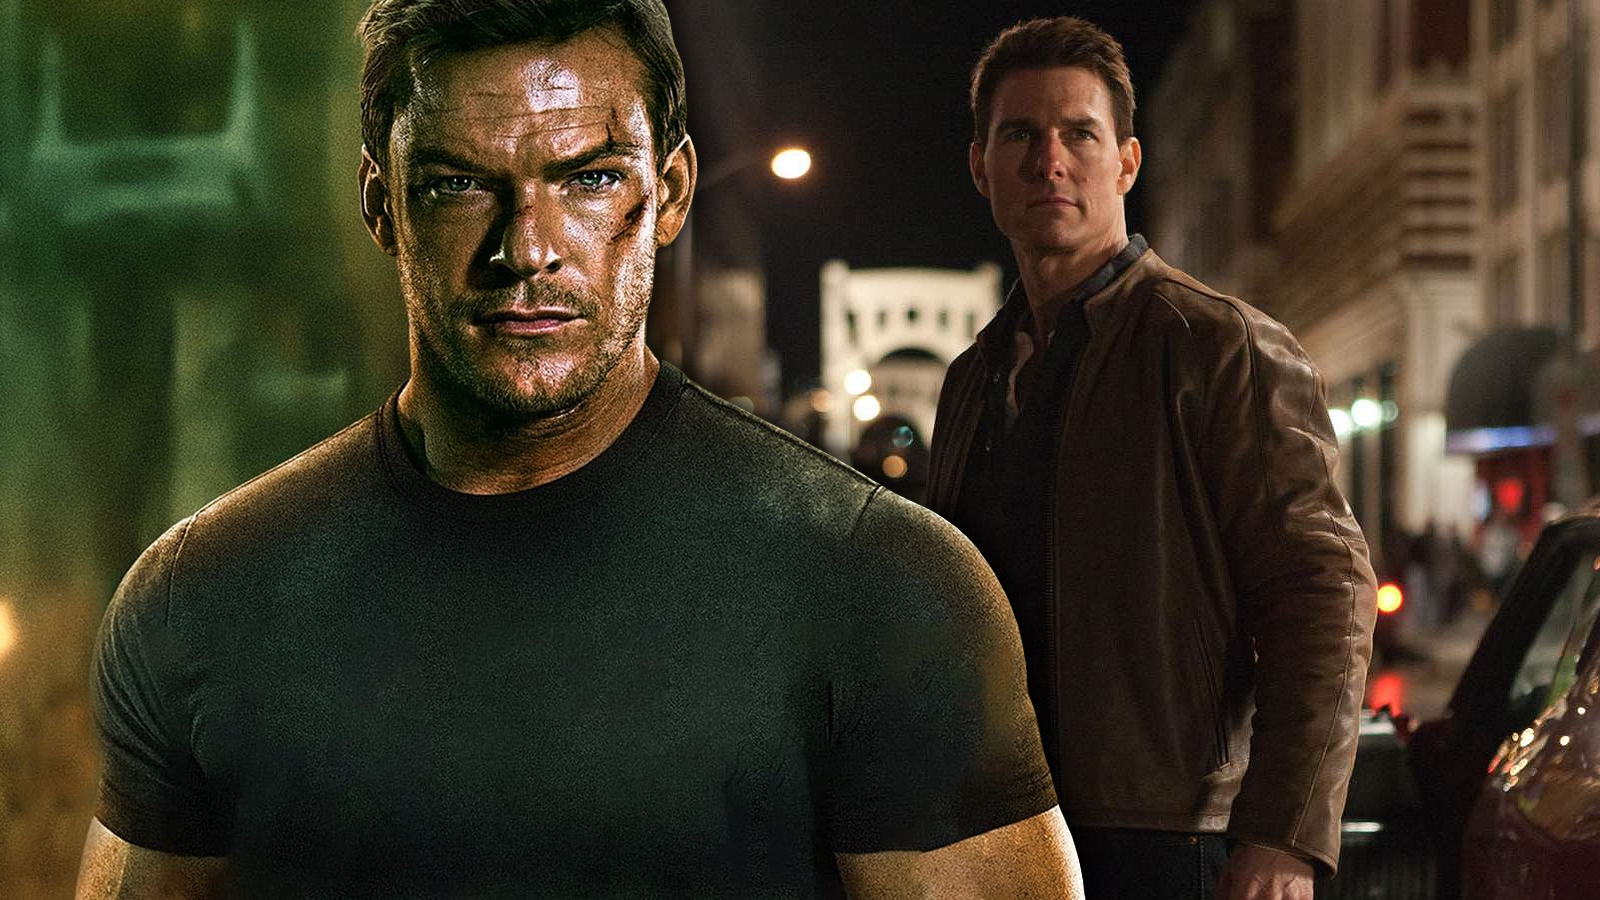 Alan Ritchson wrote Tom Cruise a letter after replacing him as Reacher ...